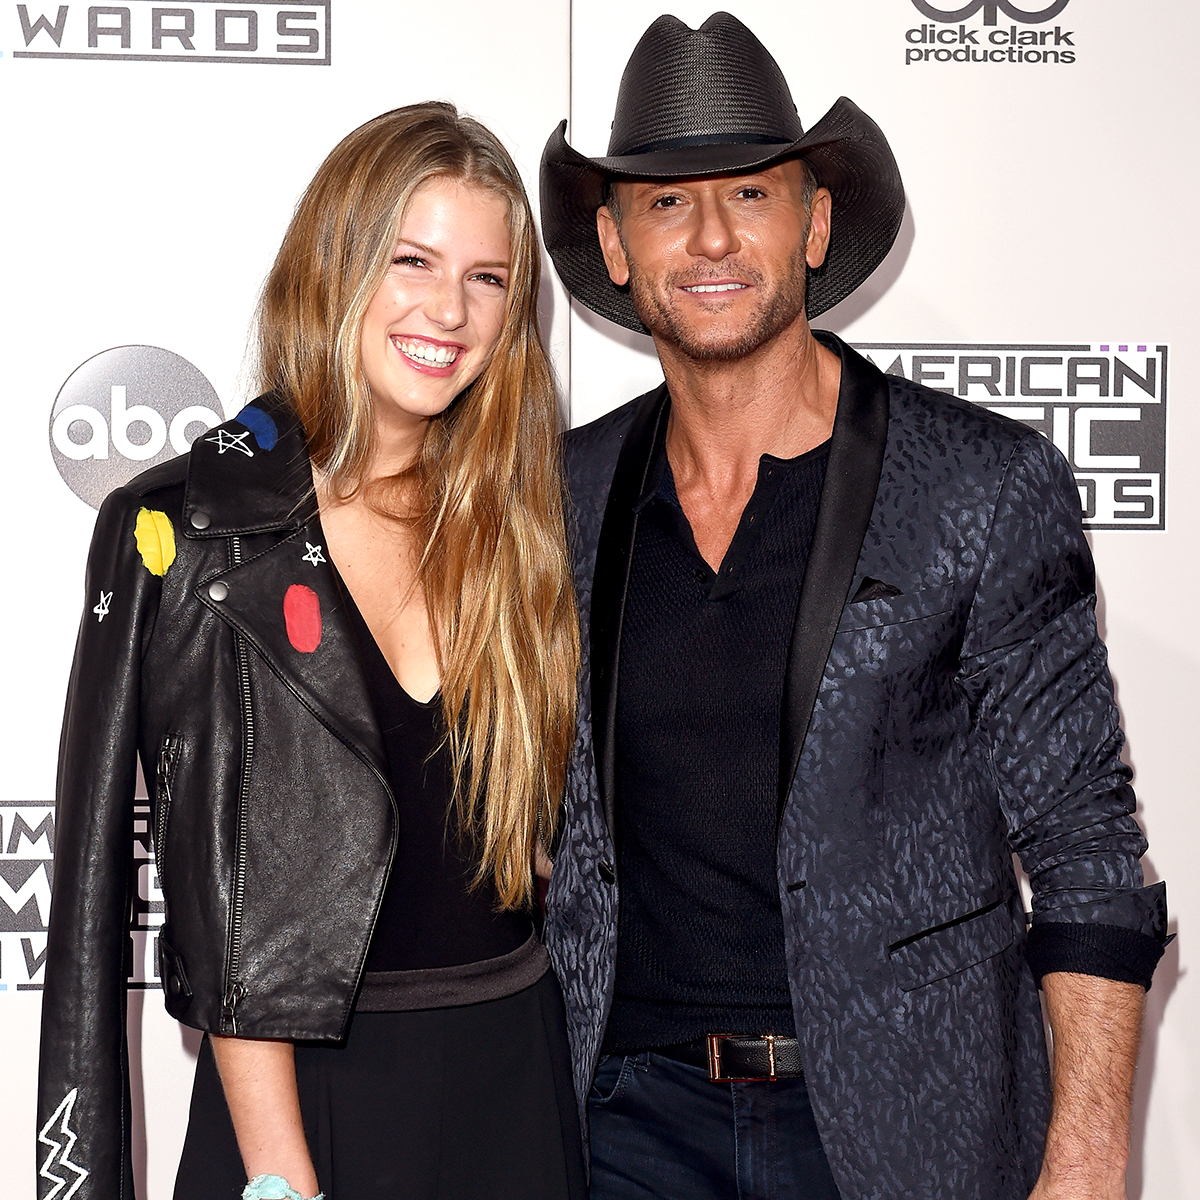 Who Knew Tim McGraw's Daughter Could Do This!